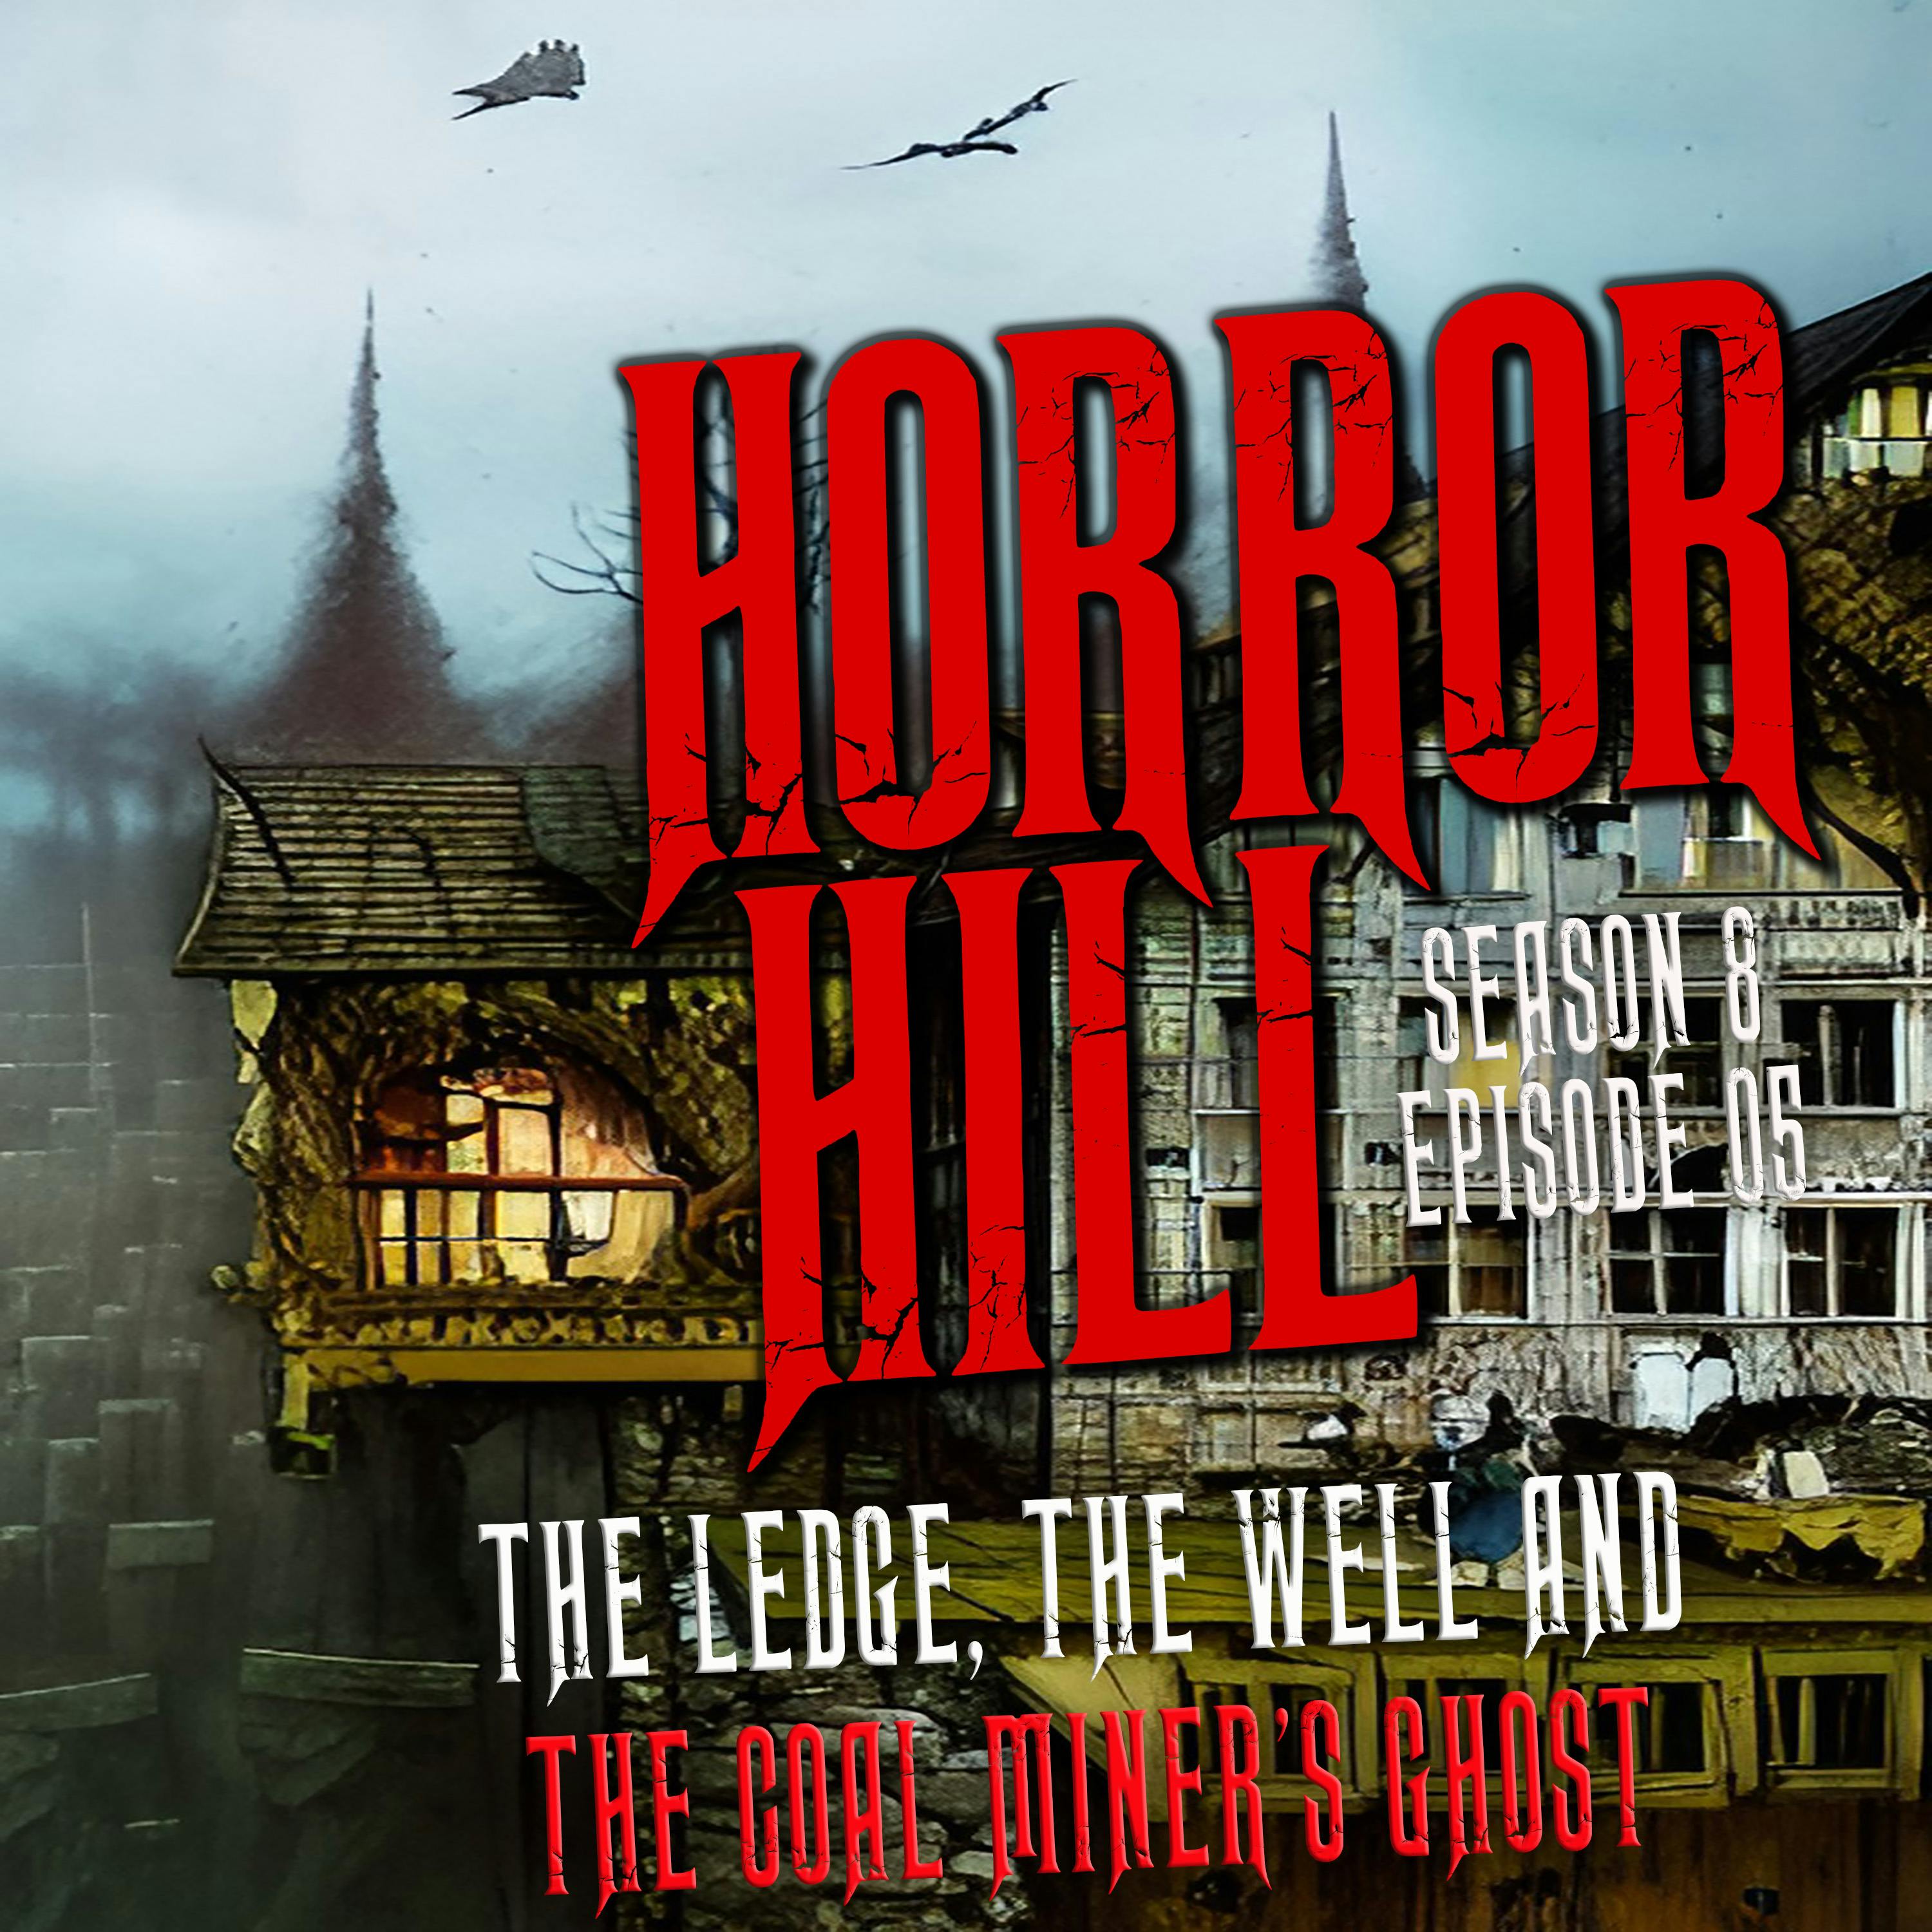 S8E05- "The Ledge, the Well and the Coal Miner's Ghost" - Horror Hill